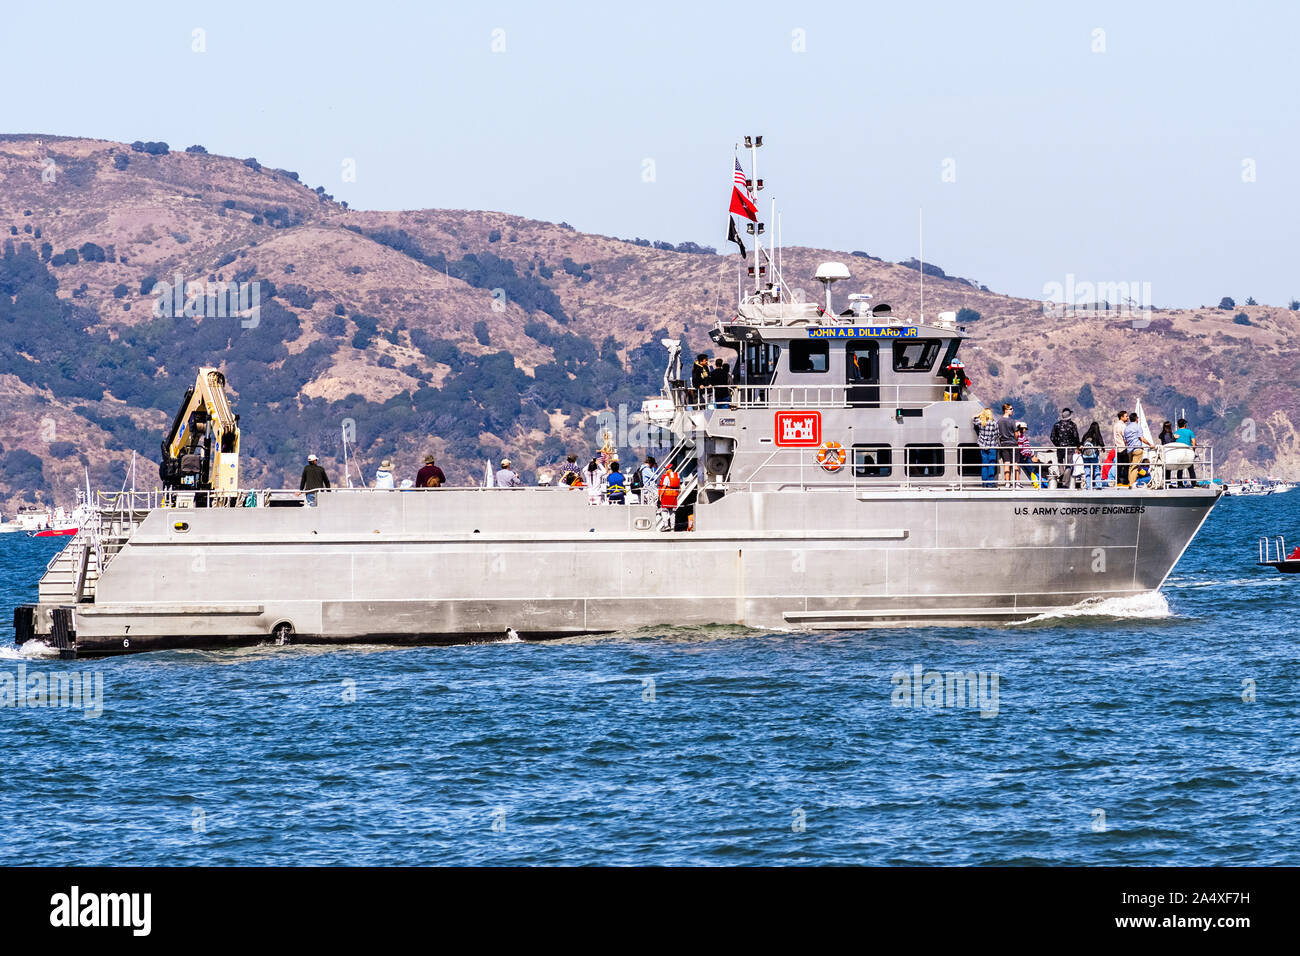 Oct 12, 2019 San Francisco / CA / USA - U.S. Army Corps of Engineers vessel participating at the 39th Fleet Week event; Stock Photo